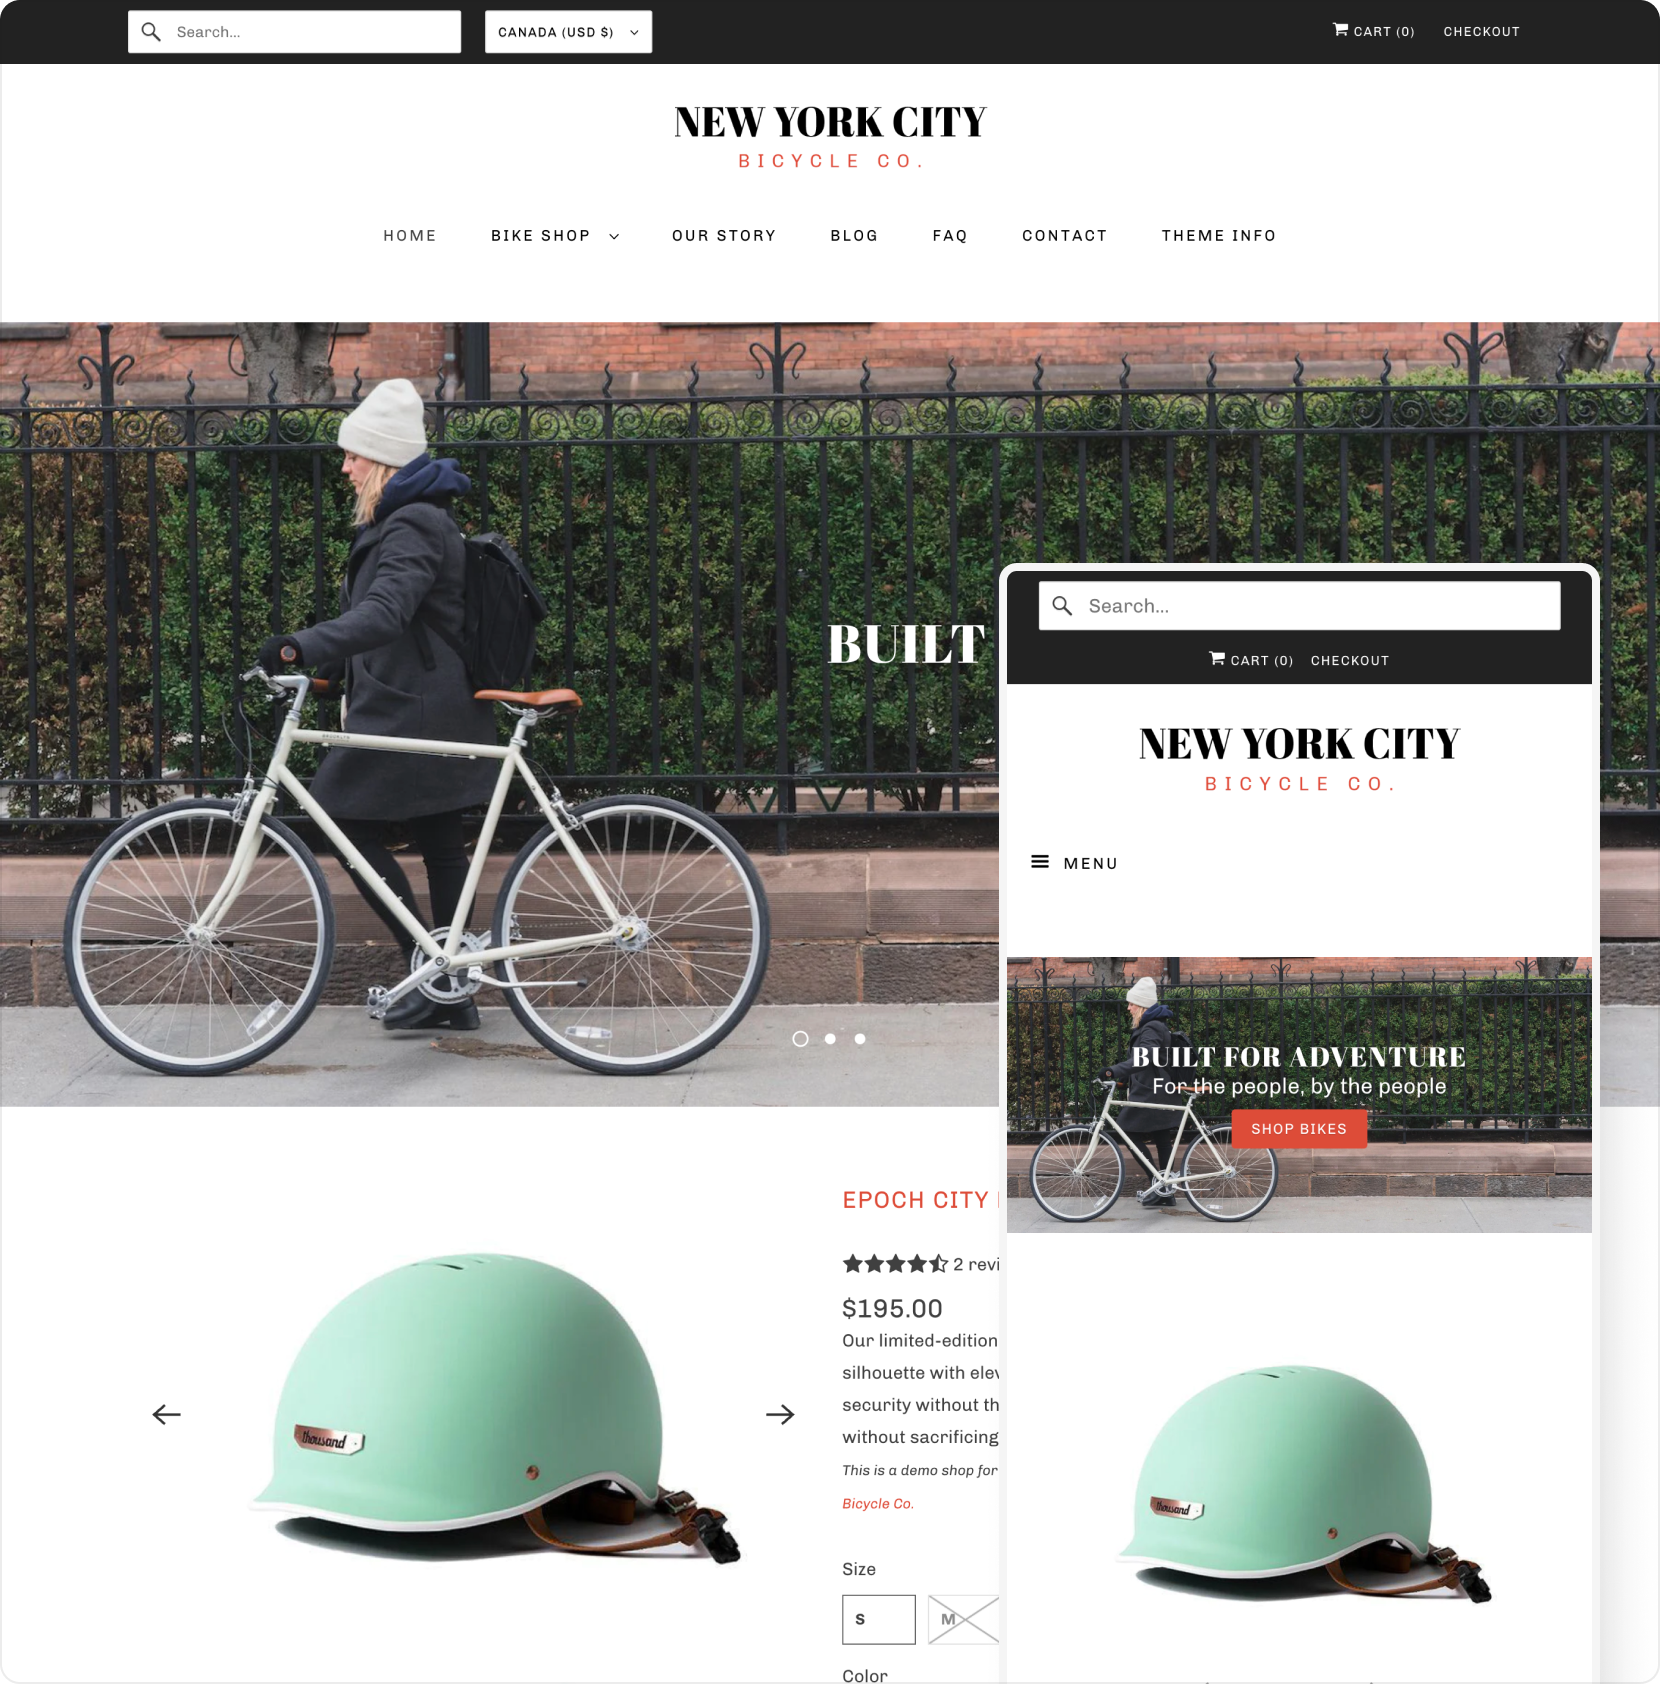 responsive shopify theme london theme style home page shown desktop and mobile devices